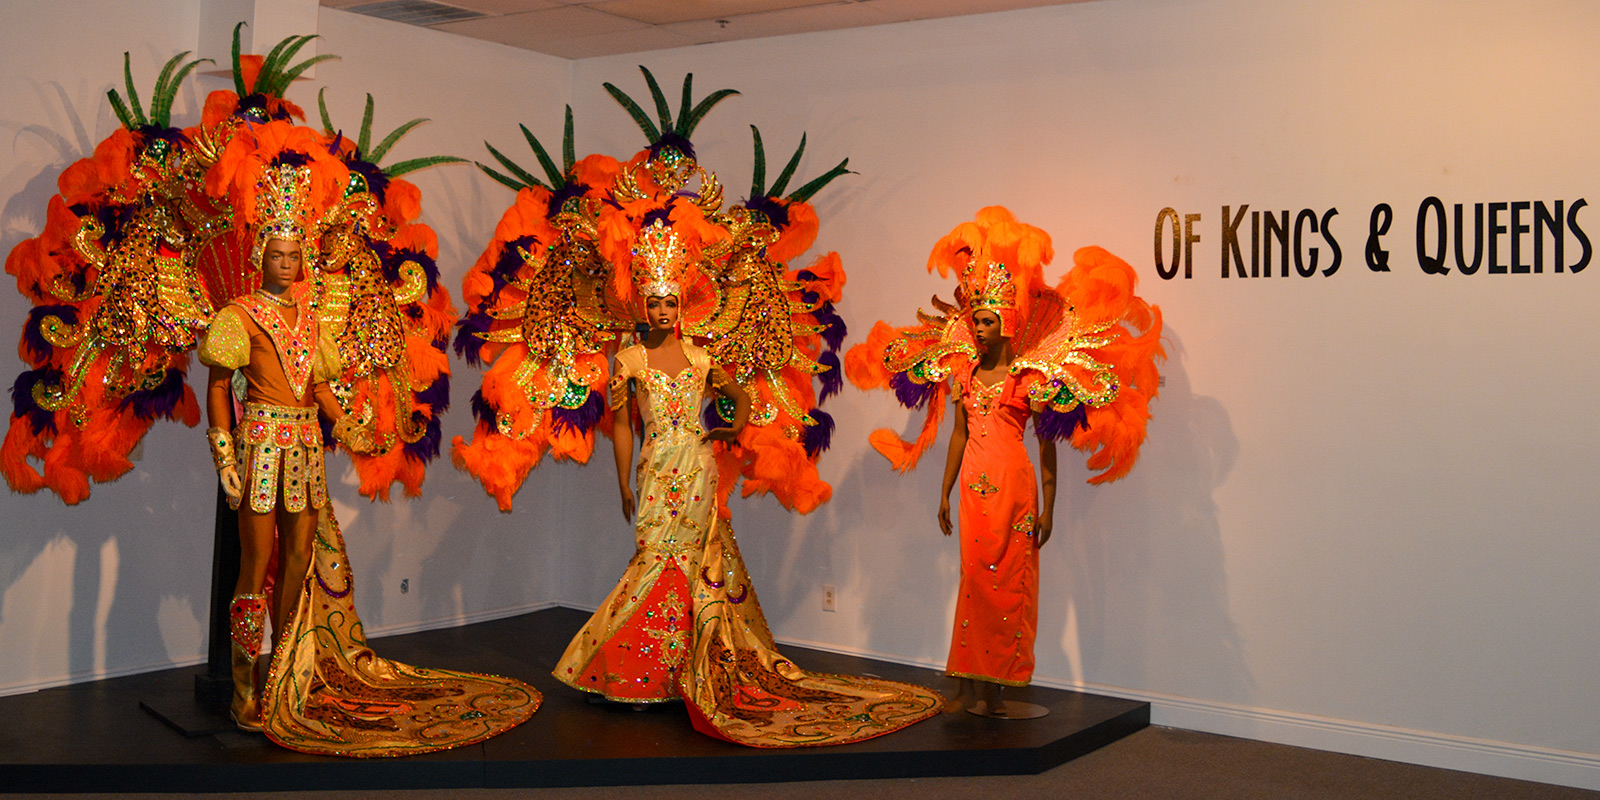 Display of matching Mardi Gras king and queen regalia at the Mardi Gras Museum of Costumes and Culture